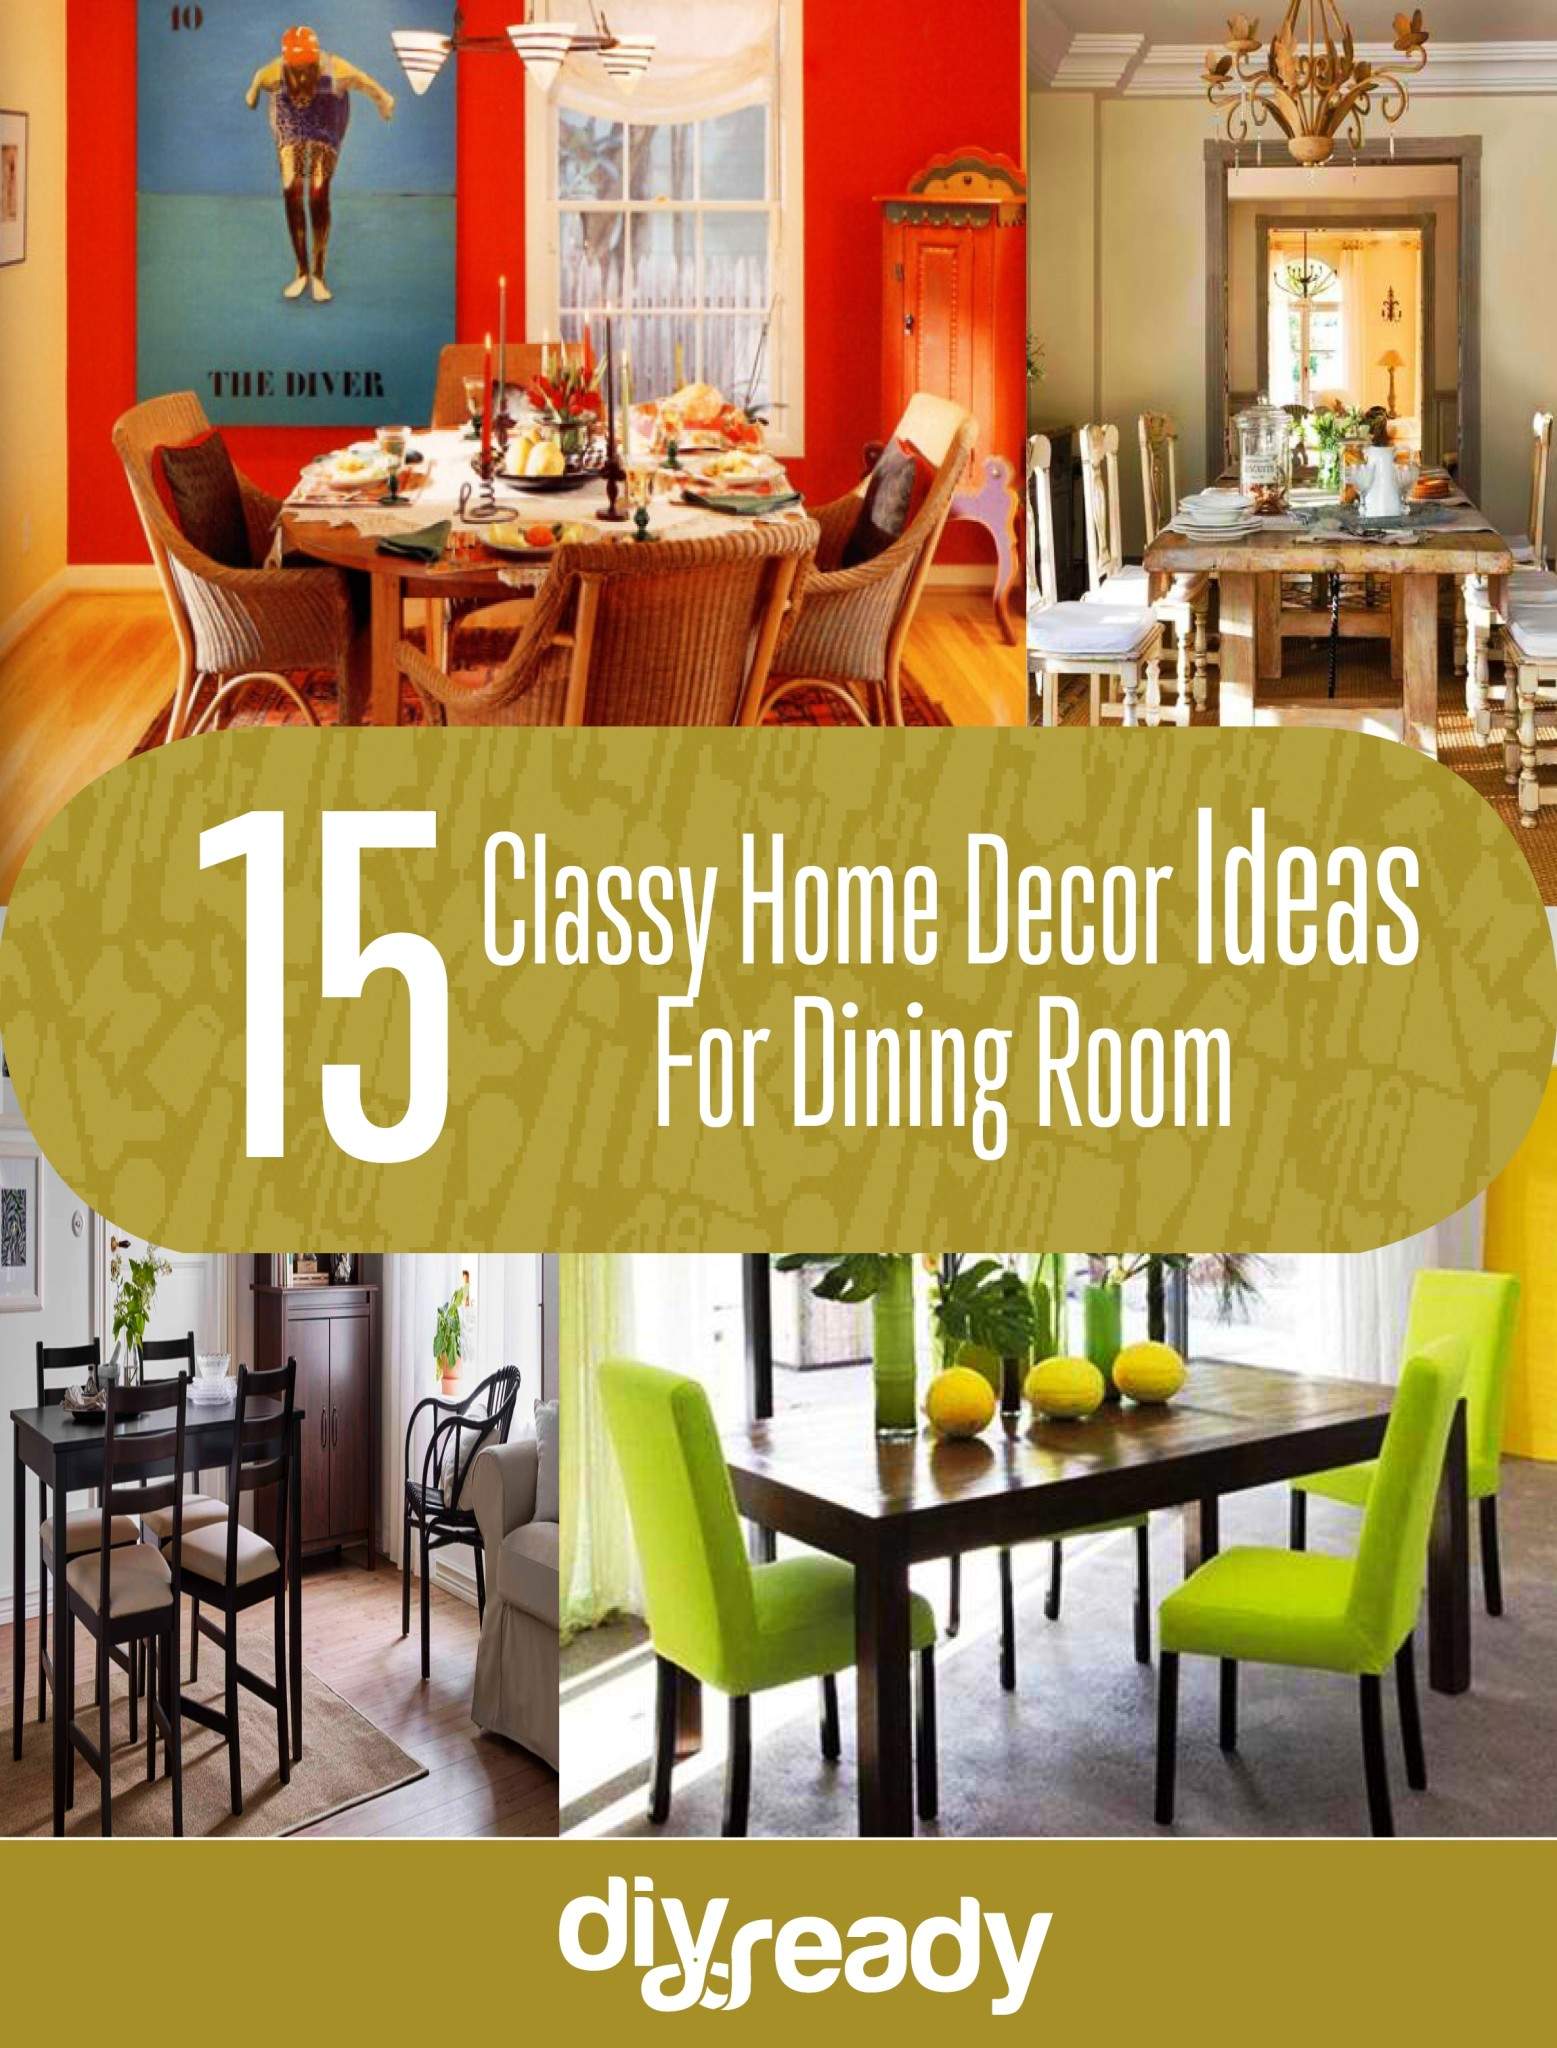 15 Classy Home Decor Ideas for Dining Room